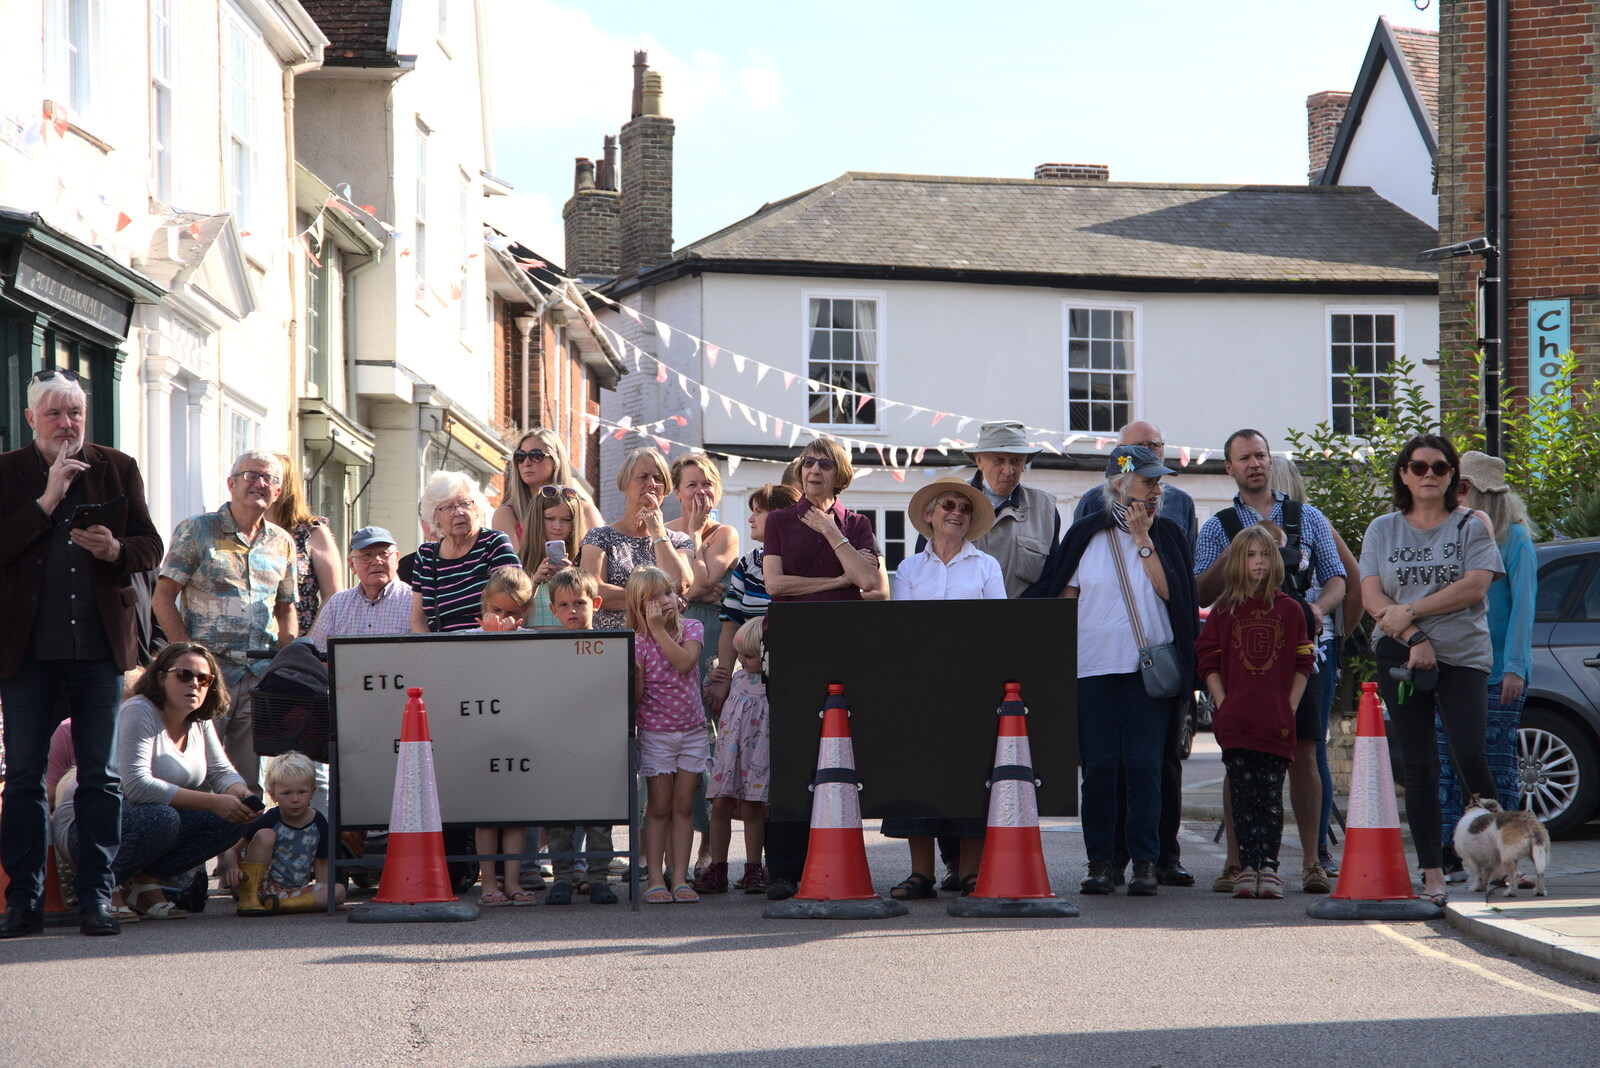 The streets have been blocked off for the occasion from Italian Cars and a Royal Proclamation, Eye, Suffolk - 11th September 2022